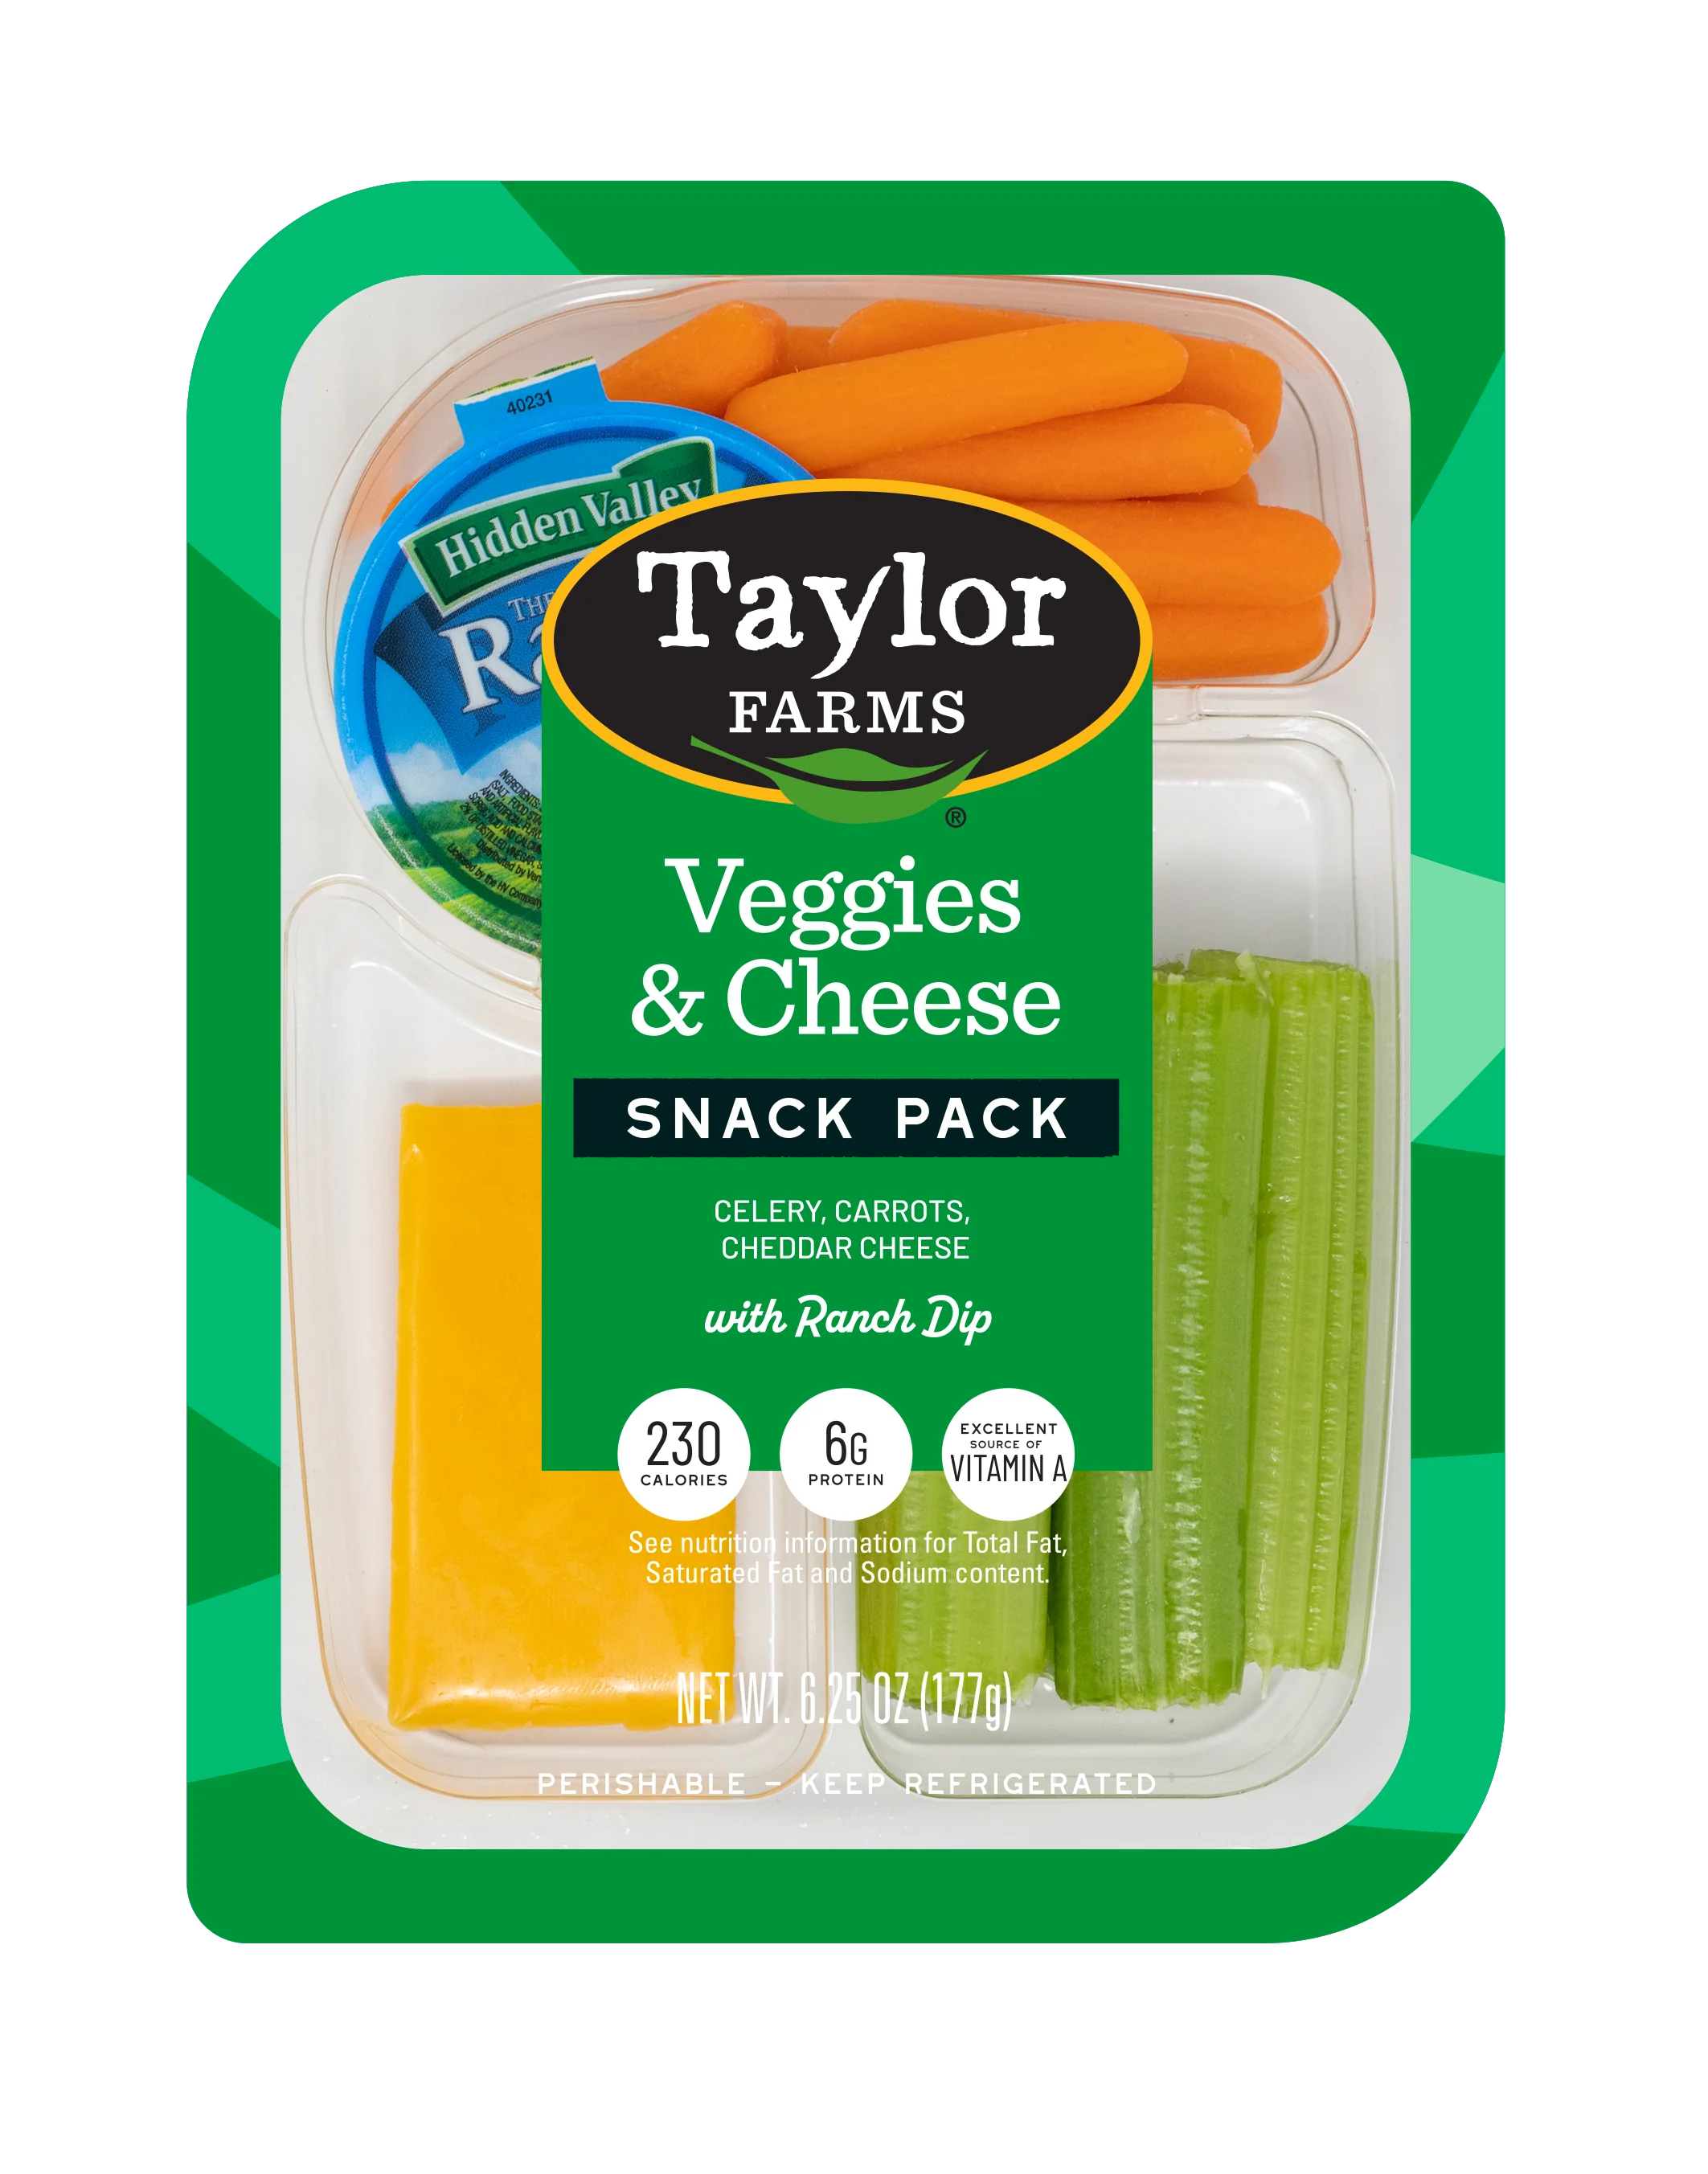 The Taylor Farms Veggies & Cheese Snack Pack package, showing celery stalks, baby carrots, cheddar cheese slices, and Hidden Valley Ranch dip.